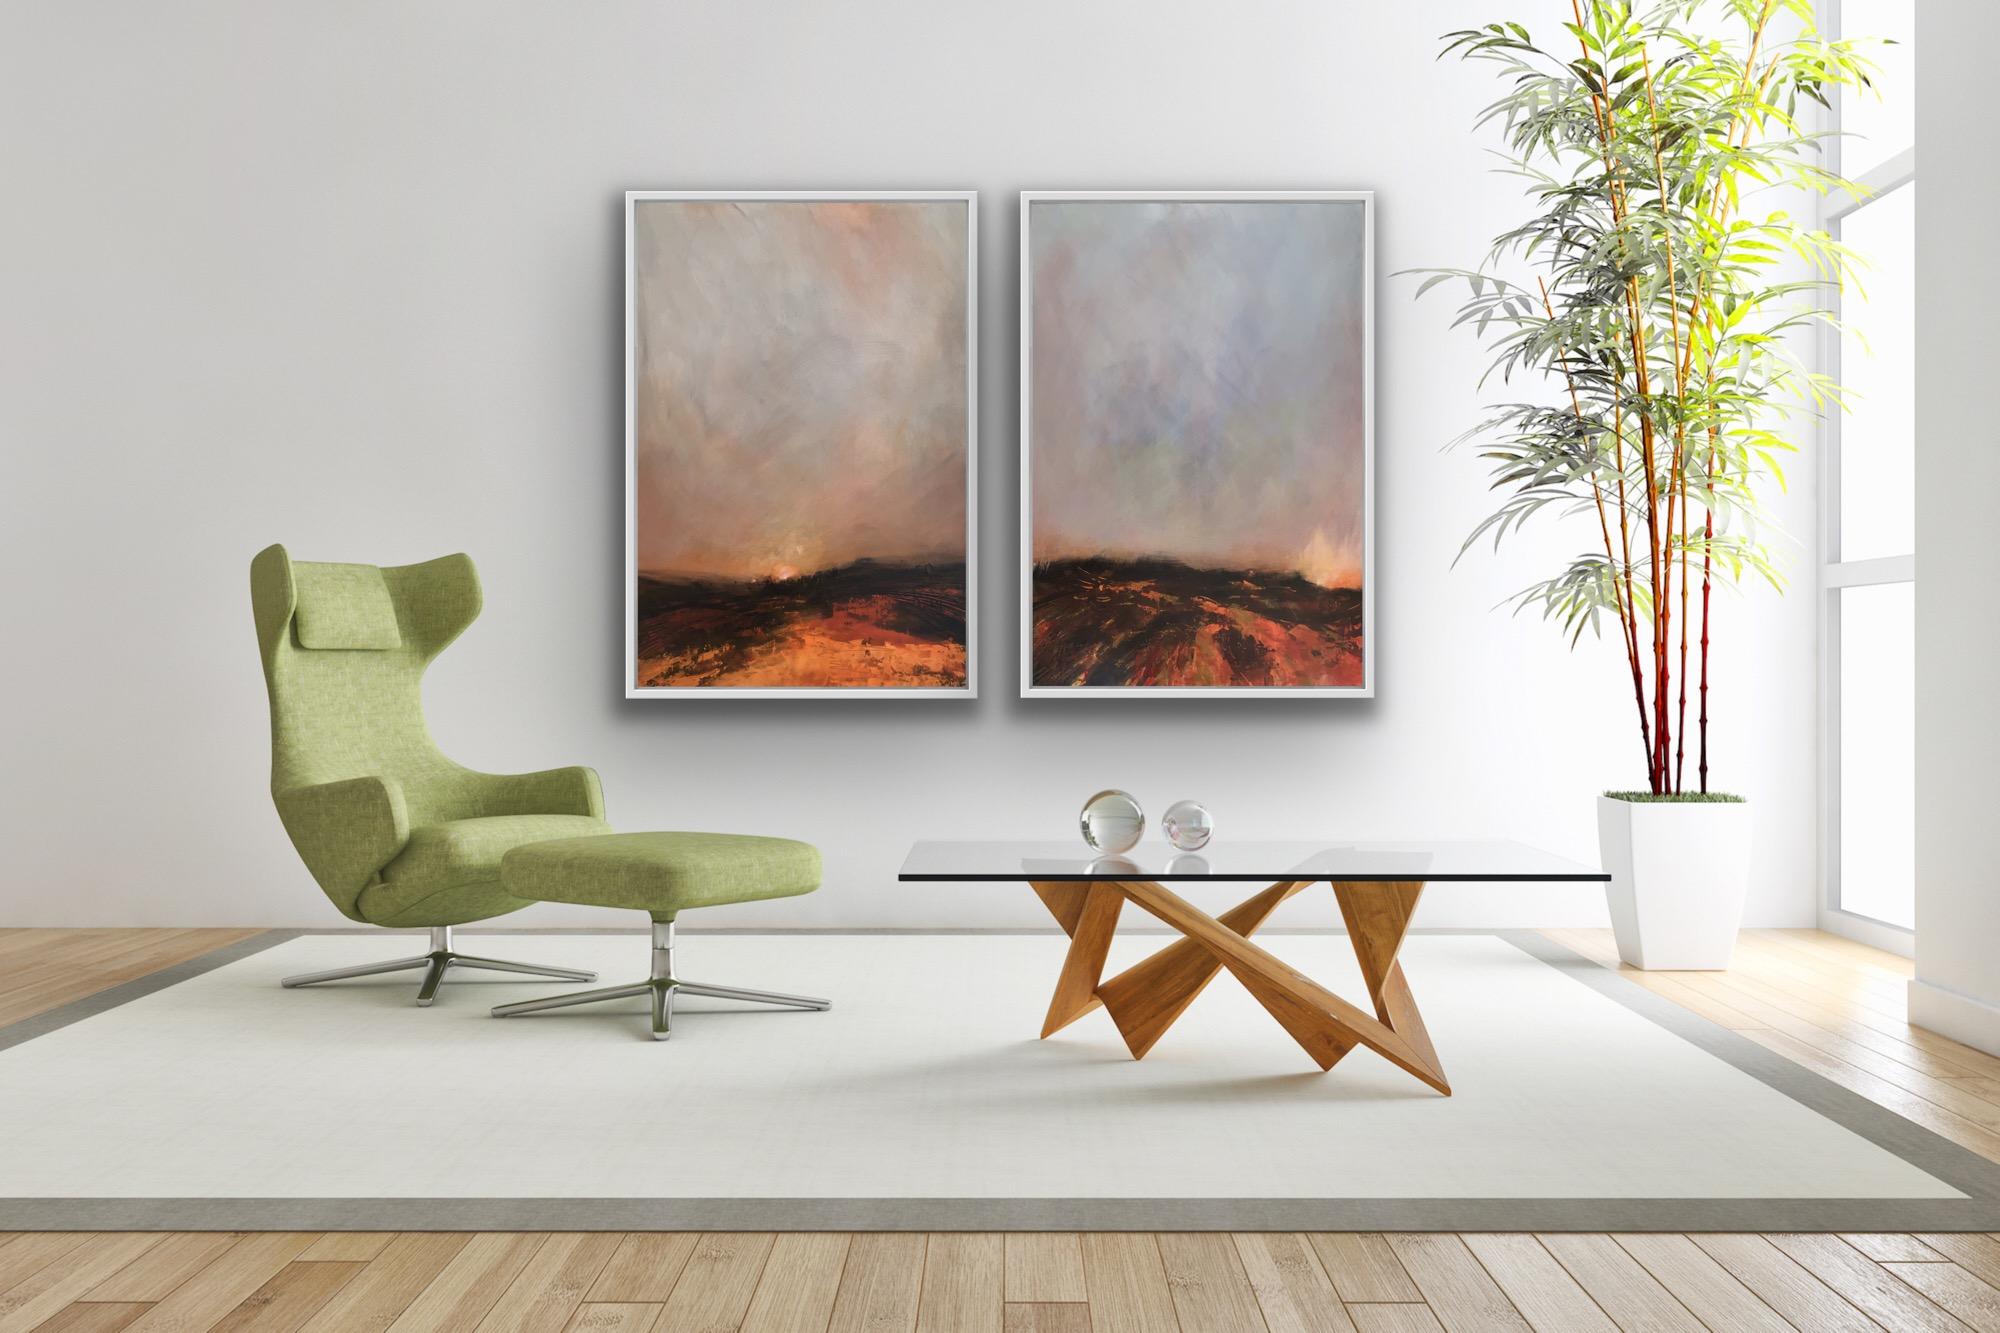 Hilltop and Hillside Diptych - Gray Landscape Painting by David Hay